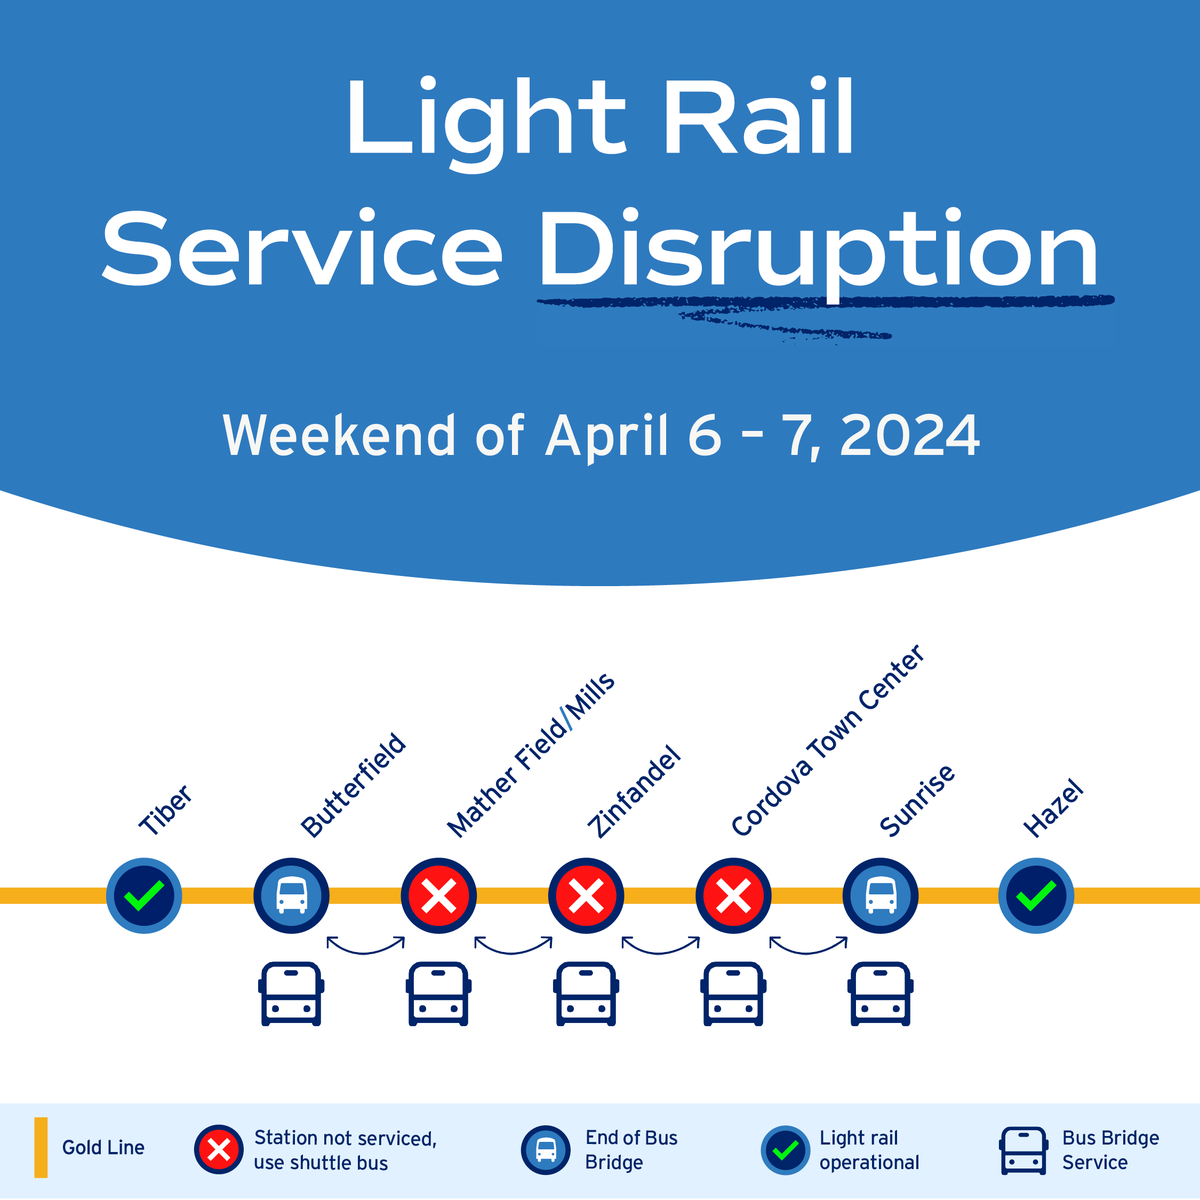 Rider Alert: Due to station platform construction at Mather Field/Mills Station, a bus bridge will be in place between Butterfield and Sunrise stations on Saturday, April 5 through 3 p.m. on Sunday, April 6, 2024. Visit sacrt.com/stationclosure for details.